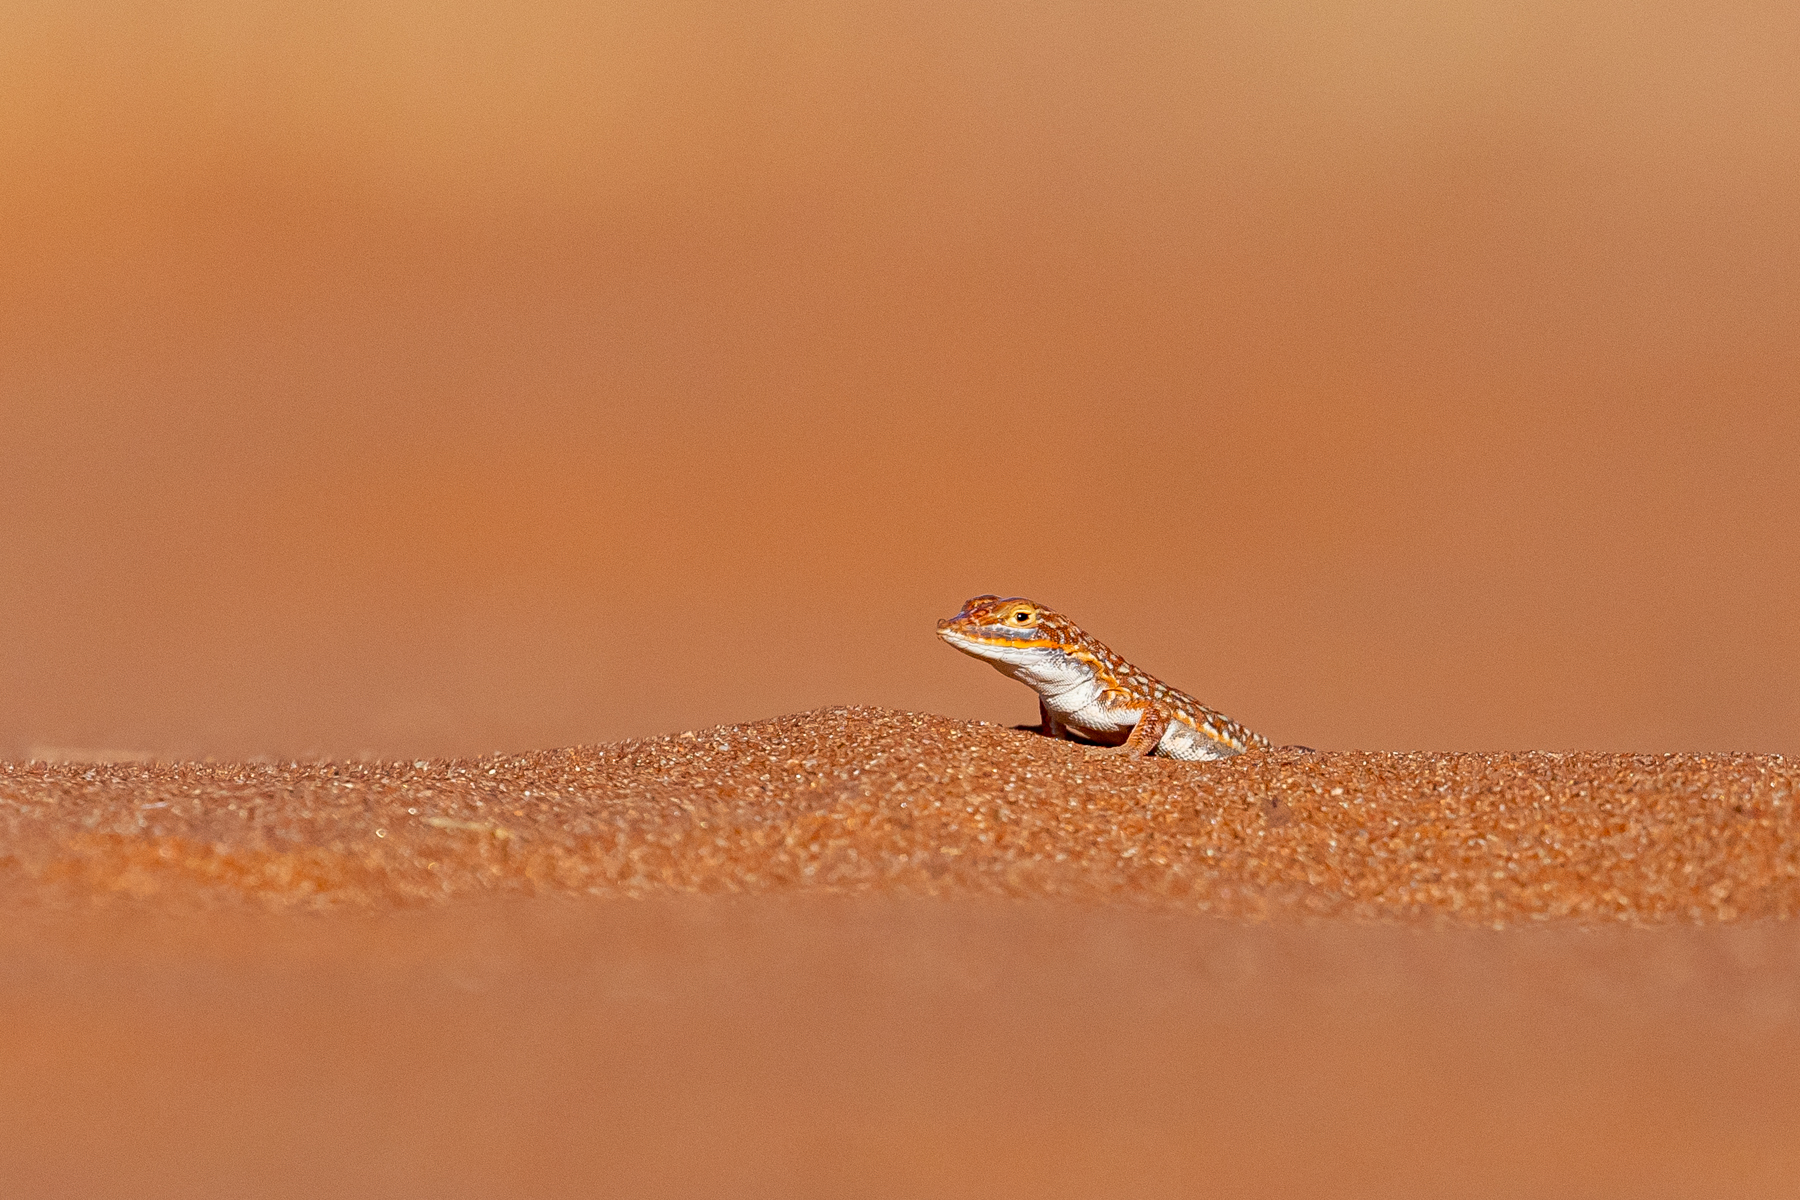 A cheeky Wedge-snouted Lizard runs around at our feet on Elim Dune in Sossusvlei